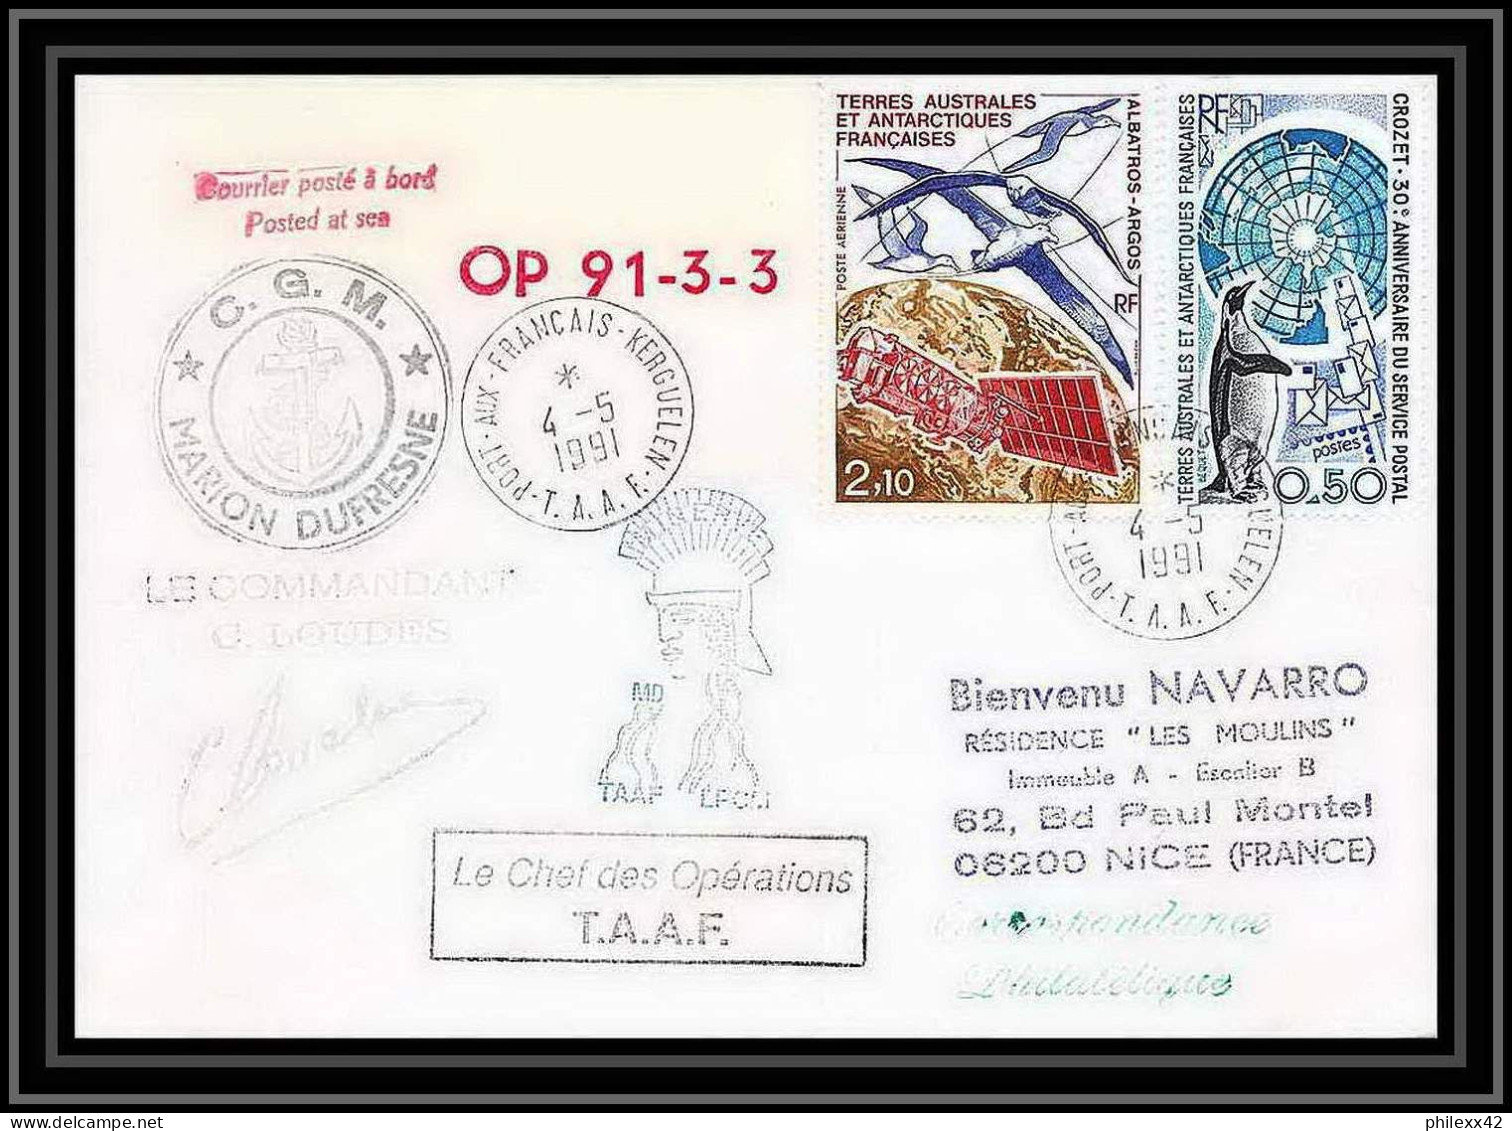 1765 Md 68 Op 91-3-3 Suzil Signé Signed Loudes Marion Dufresne 4/5/1991 TAAF Antarctic Terres Australes Lettre (cover) - Antarctic Expeditions